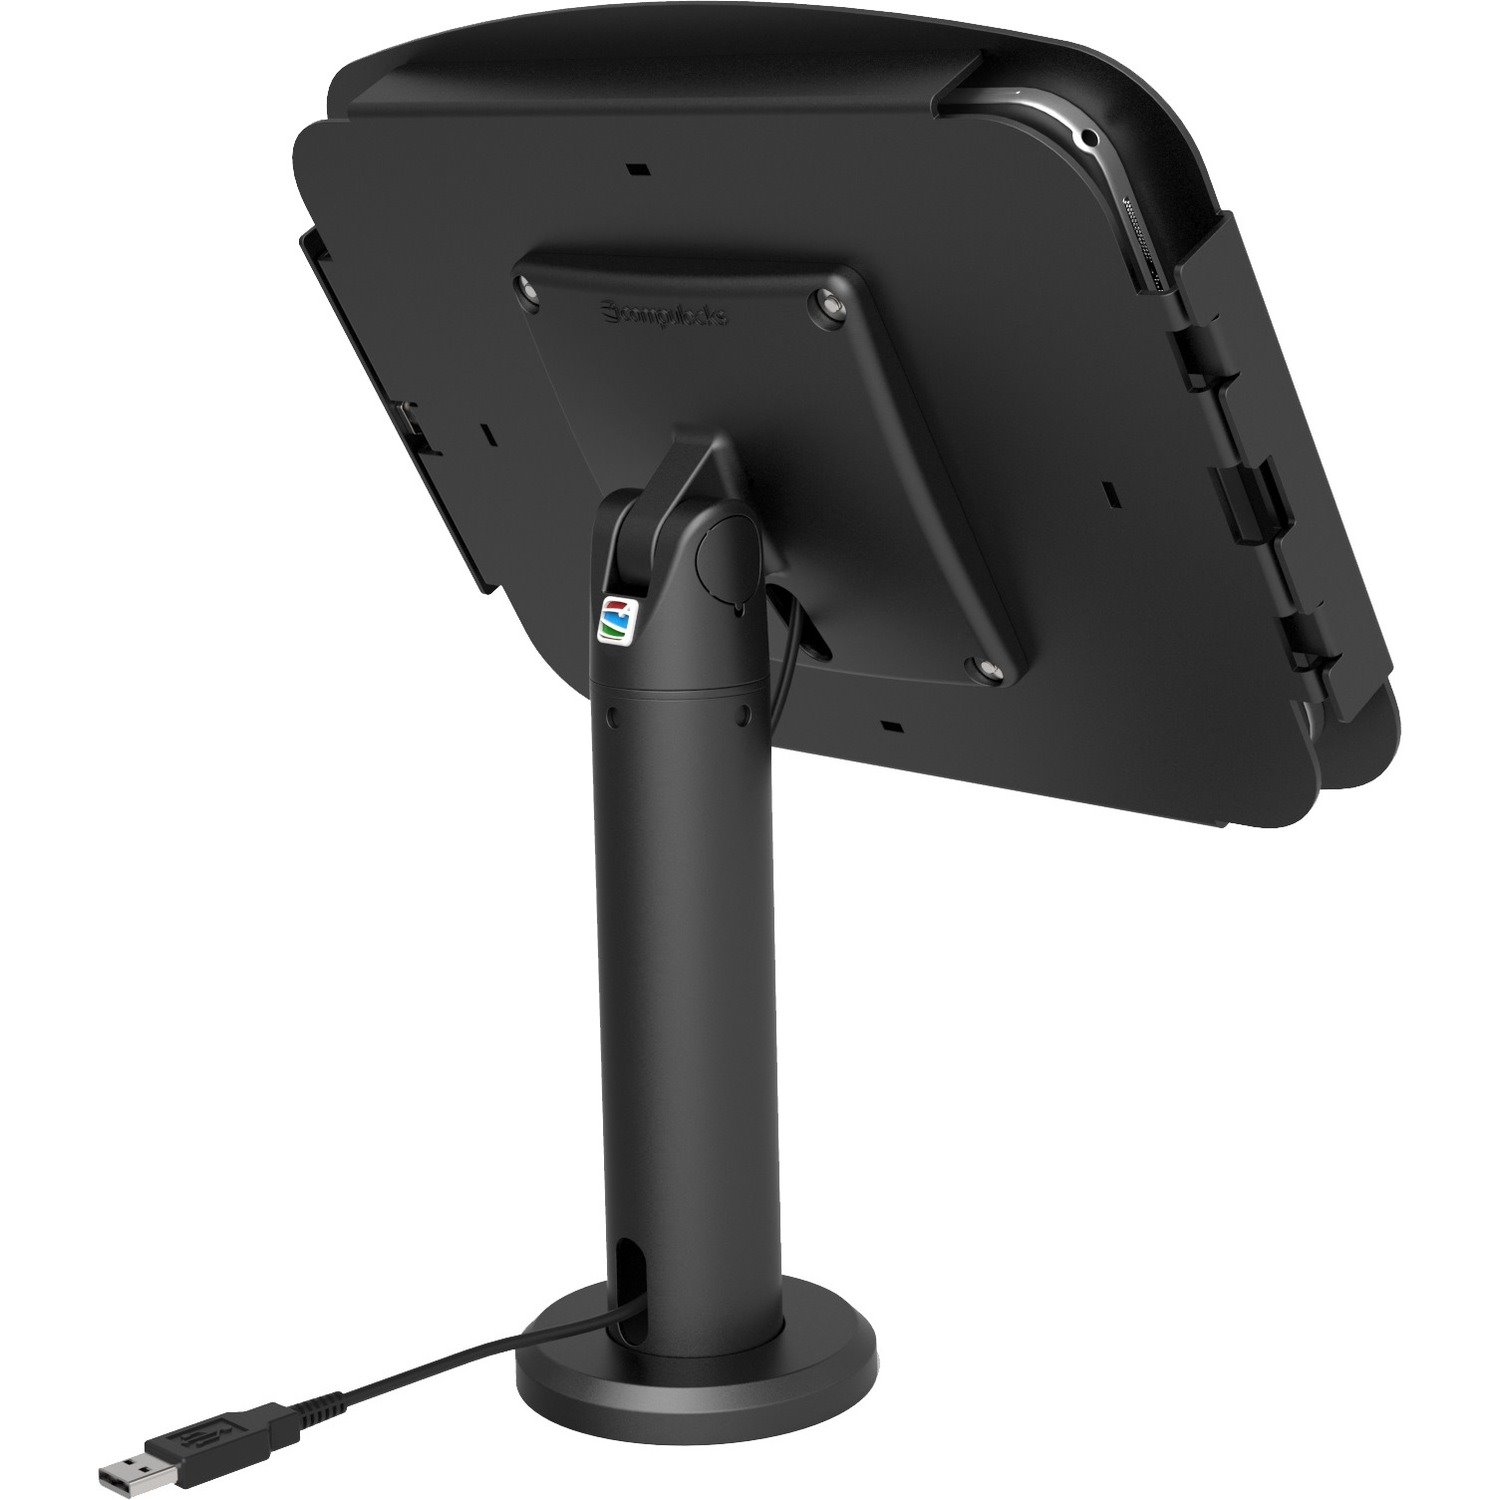 RISE for iPad 2/3/4/ AIR 1 & Air 2. The New Kiosk Stand with Vesa Mount Flip&Swivel with Cable Management - 20 cm height Black